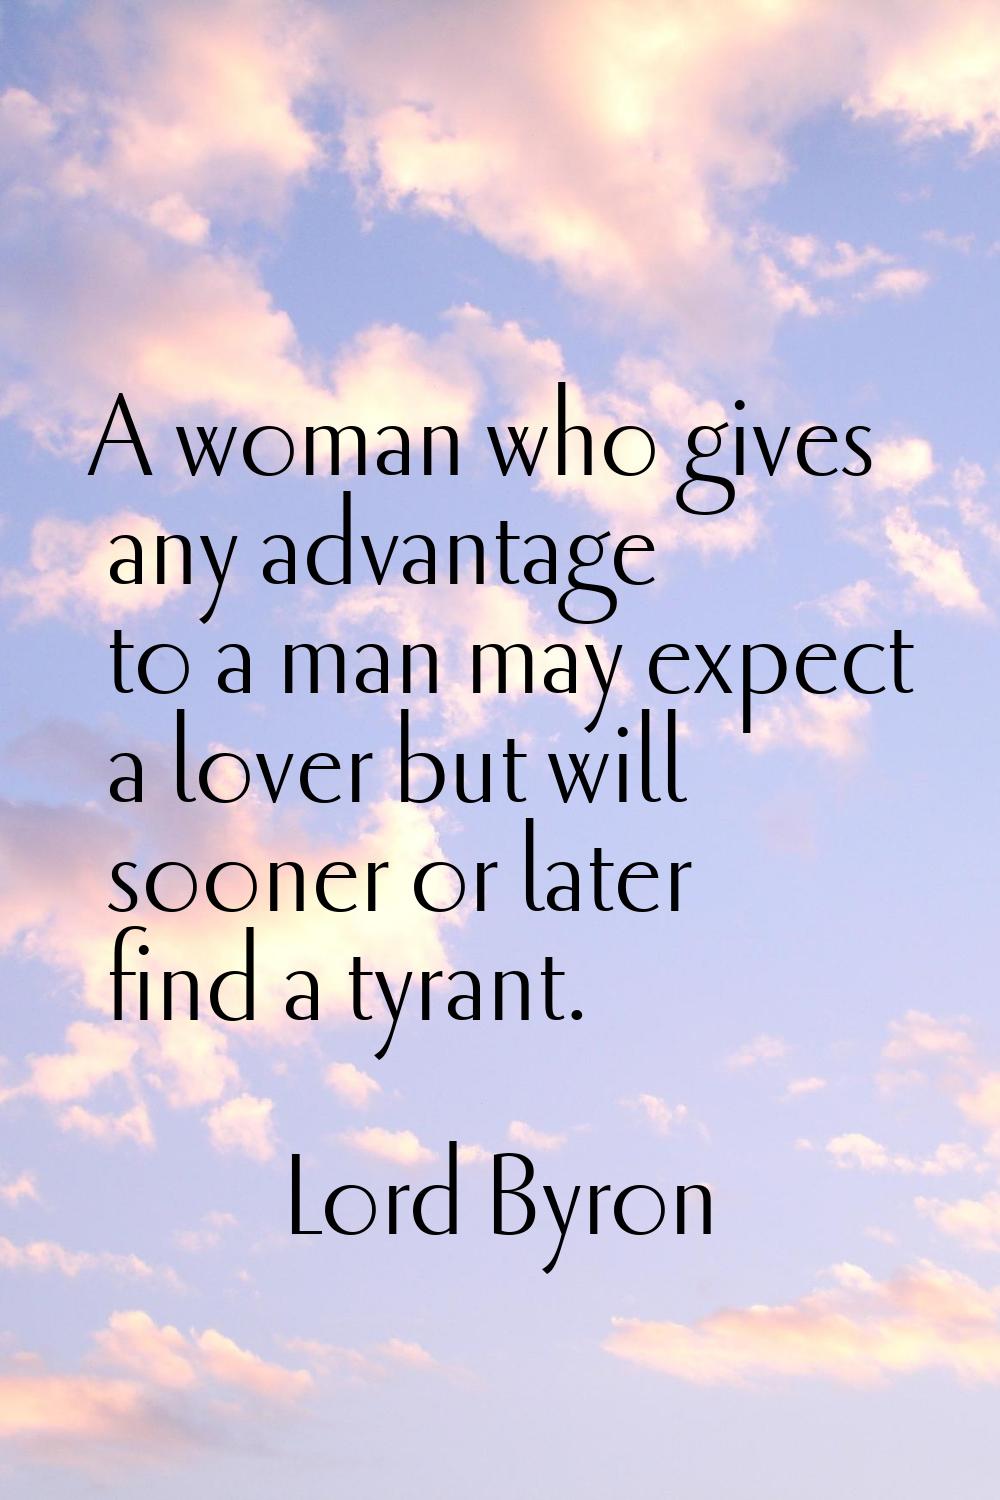 A woman who gives any advantage to a man may expect a lover but will sooner or later find a tyrant.